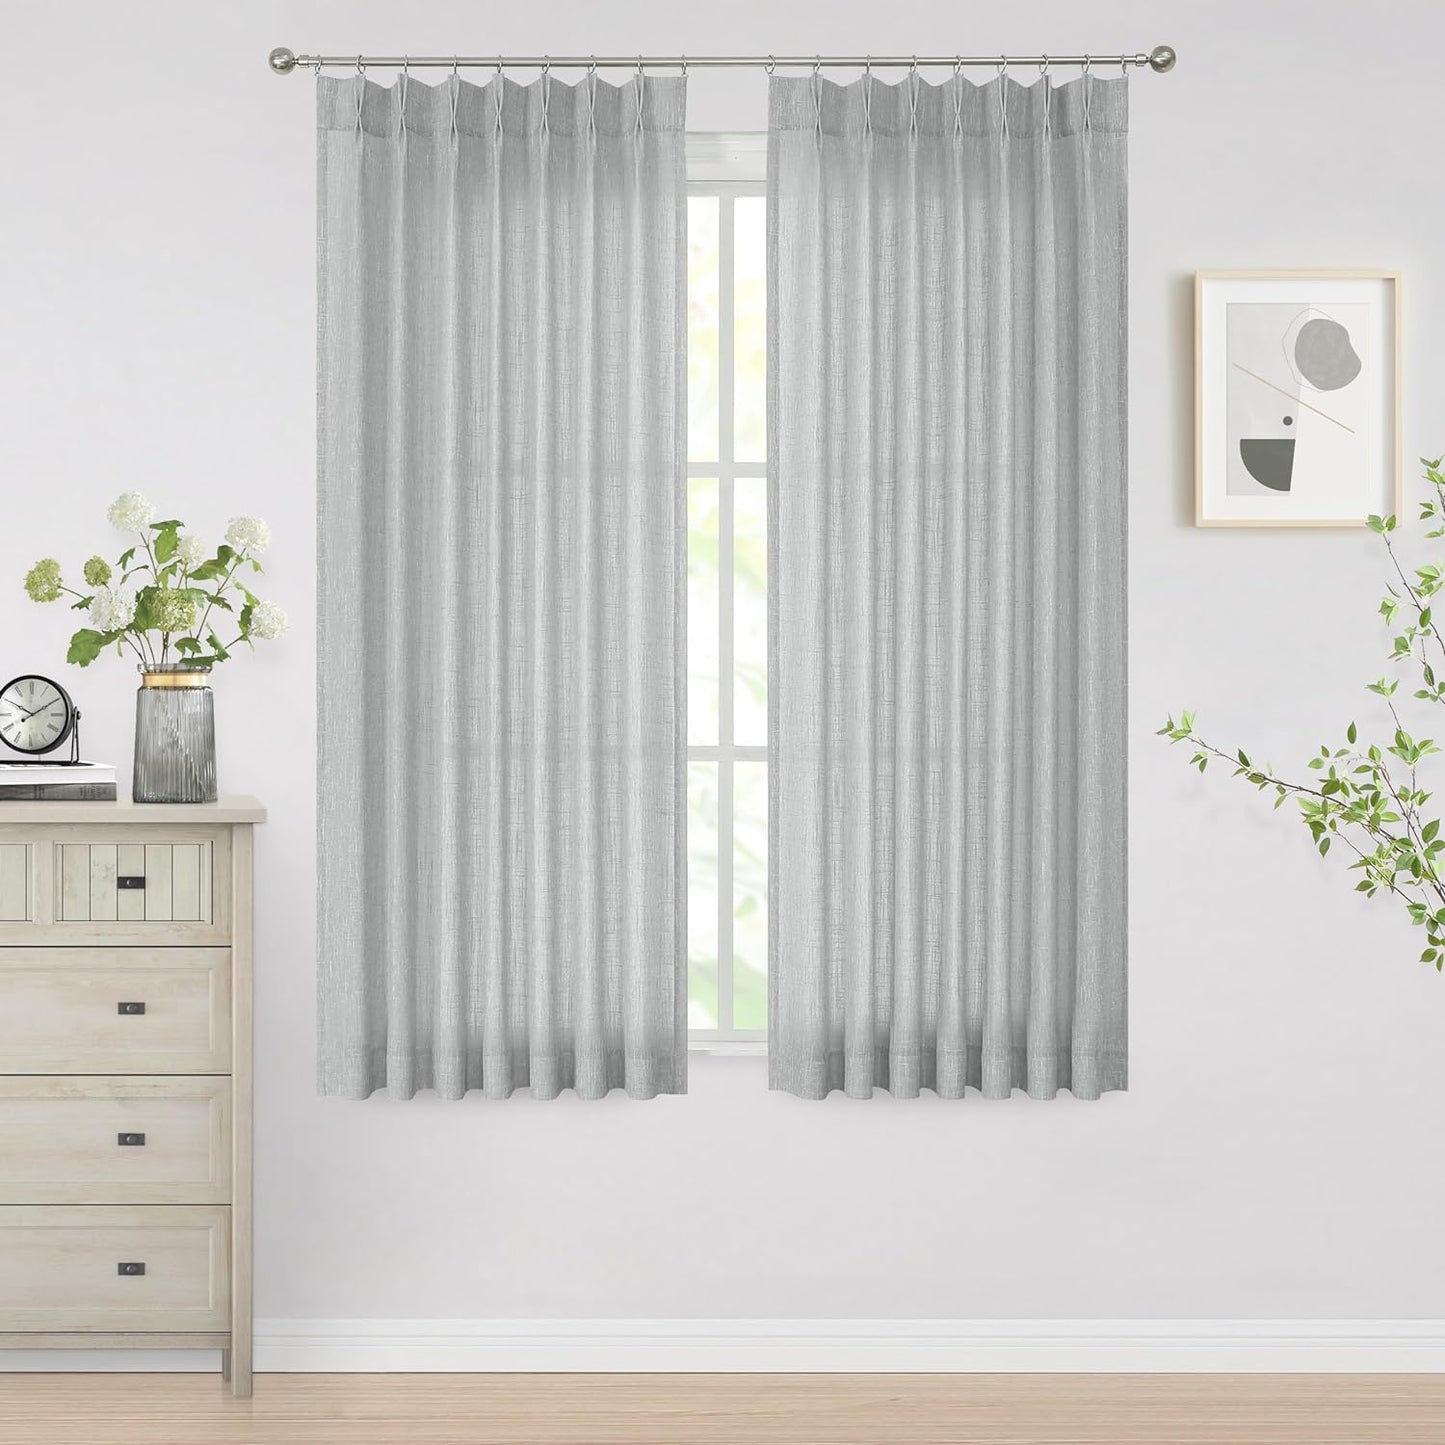 Vision Home Natural Pinch Pleated Semi Sheer Curtains Textured Linen Blended Light Filtering Window Curtains 84 Inch for Living Room Bedroom Pinch Pleat Drapes with Hooks 2 Panels 42" Wx84 L  Vision Home Silver Grey/Pinch 40"X72"X2 